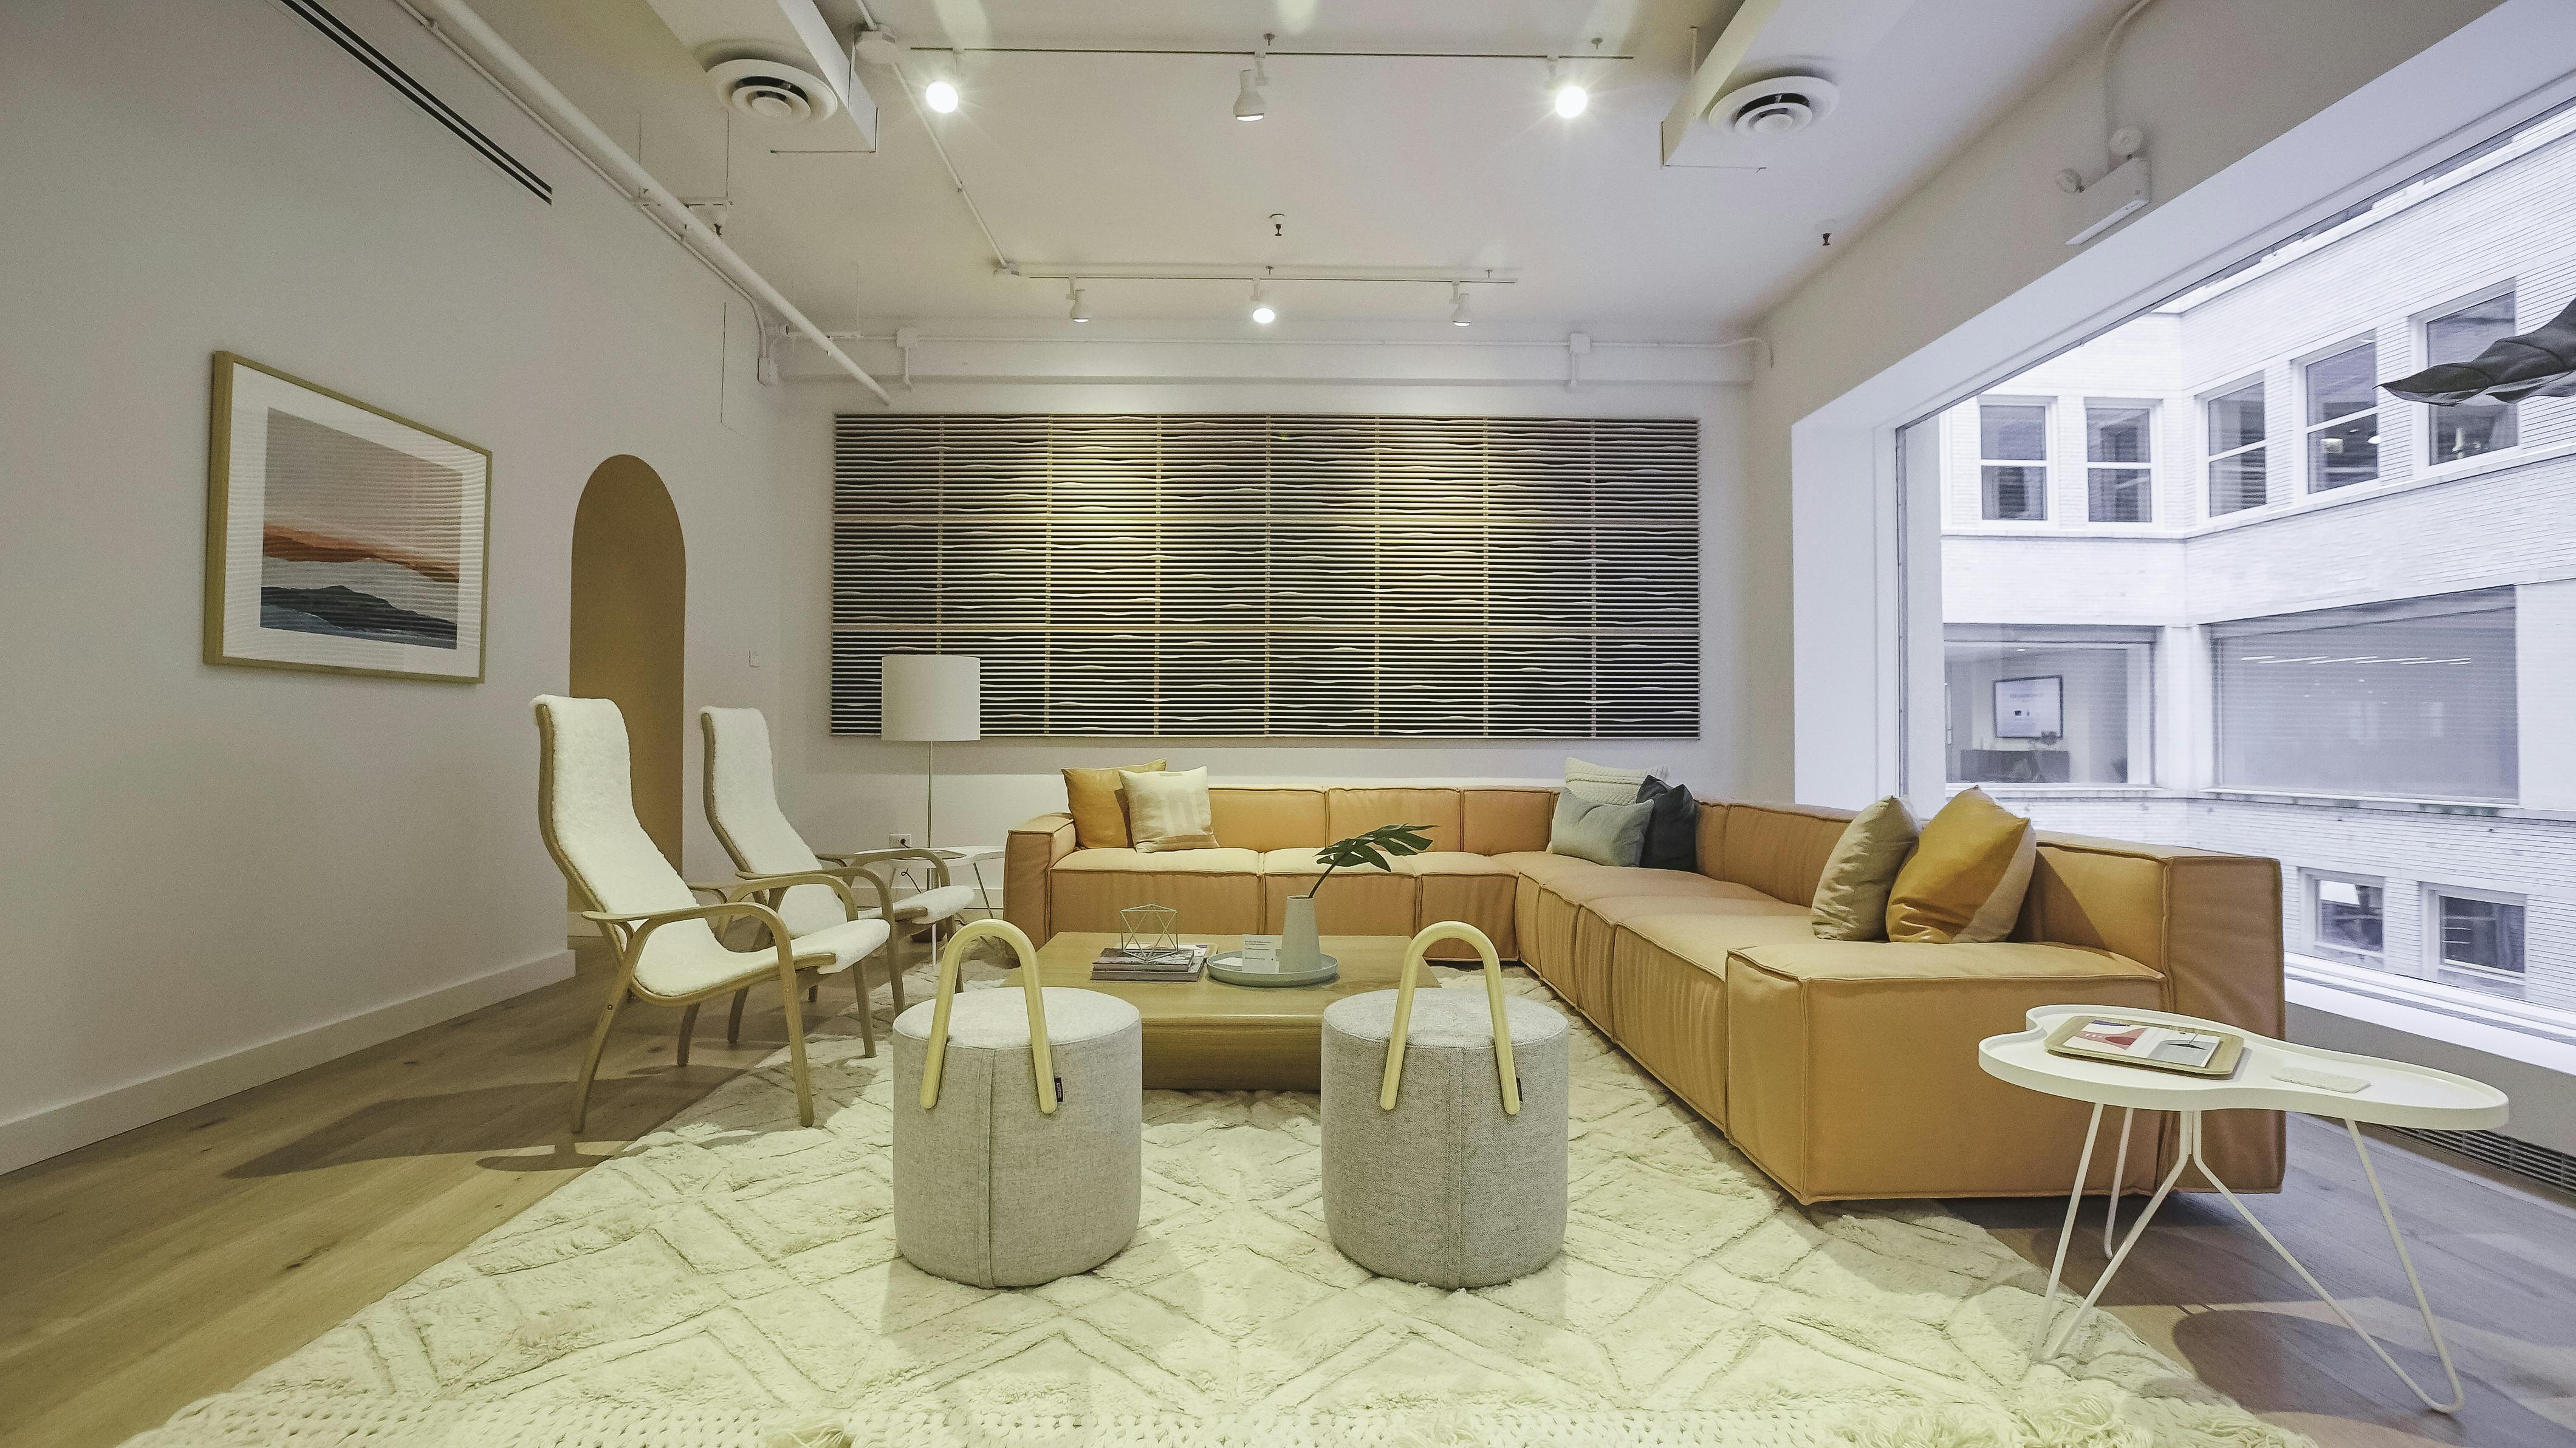 Image of Hightower's showroom with a pale peach colored sectional, two Lamino chairs with white sheepskin, and two Amstelle Poufs. The room has a white rug and wood floors.